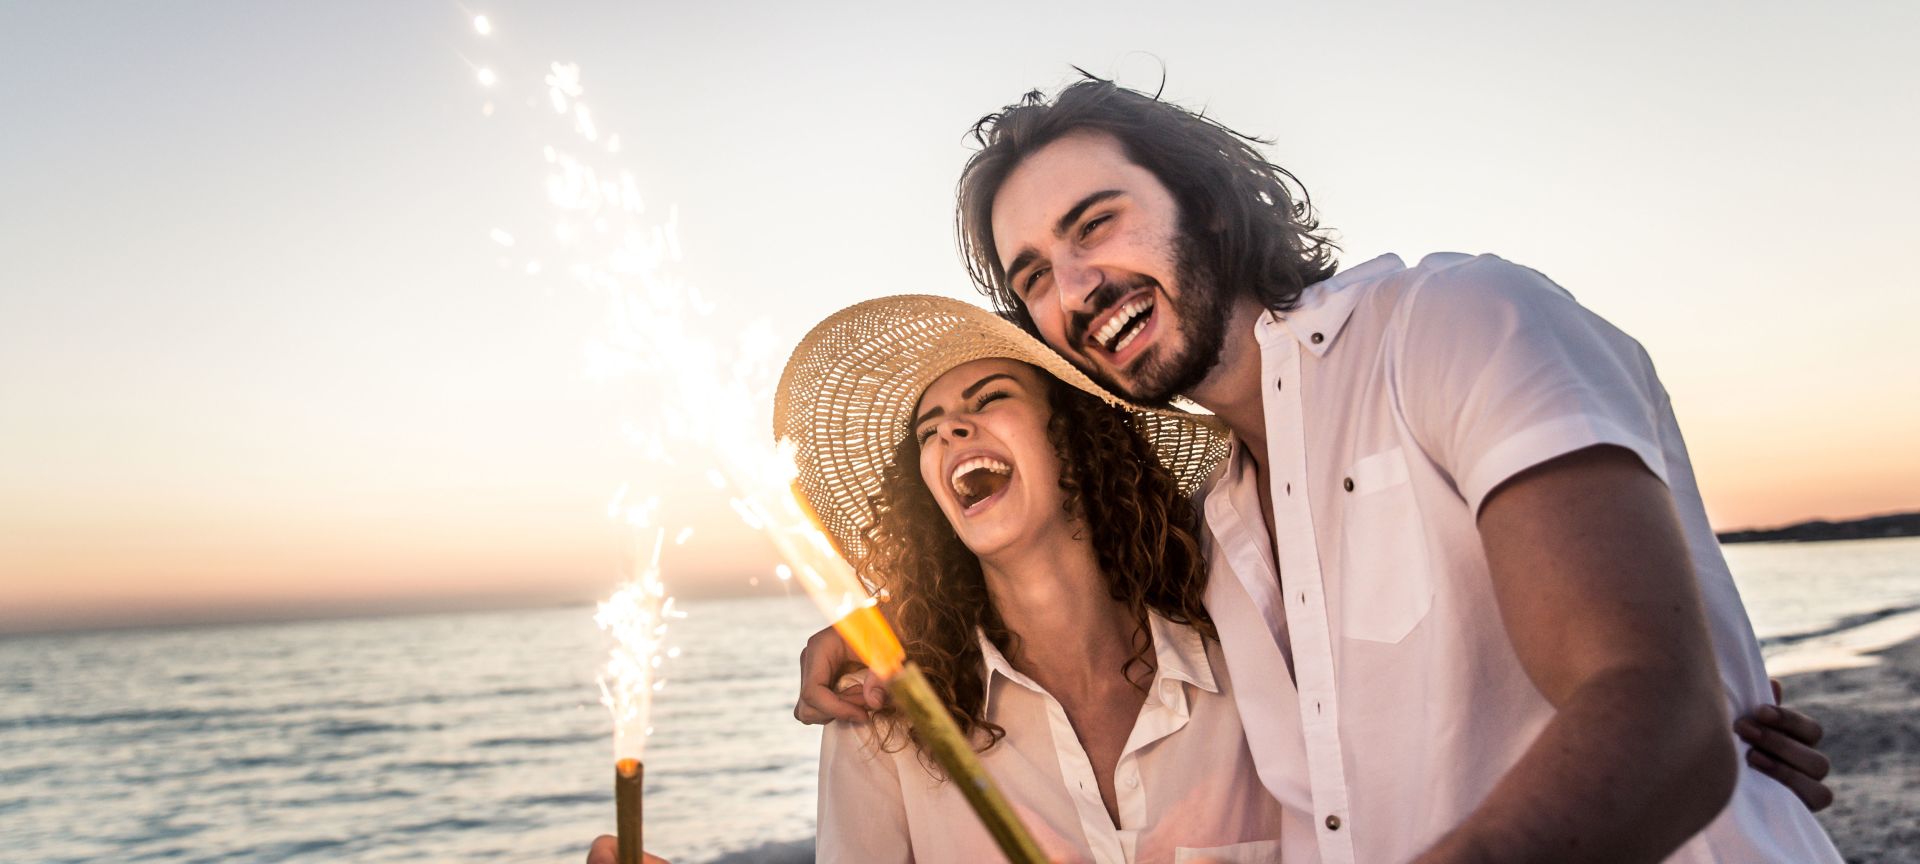 Couple on Beach with Sparklers in Their Hands